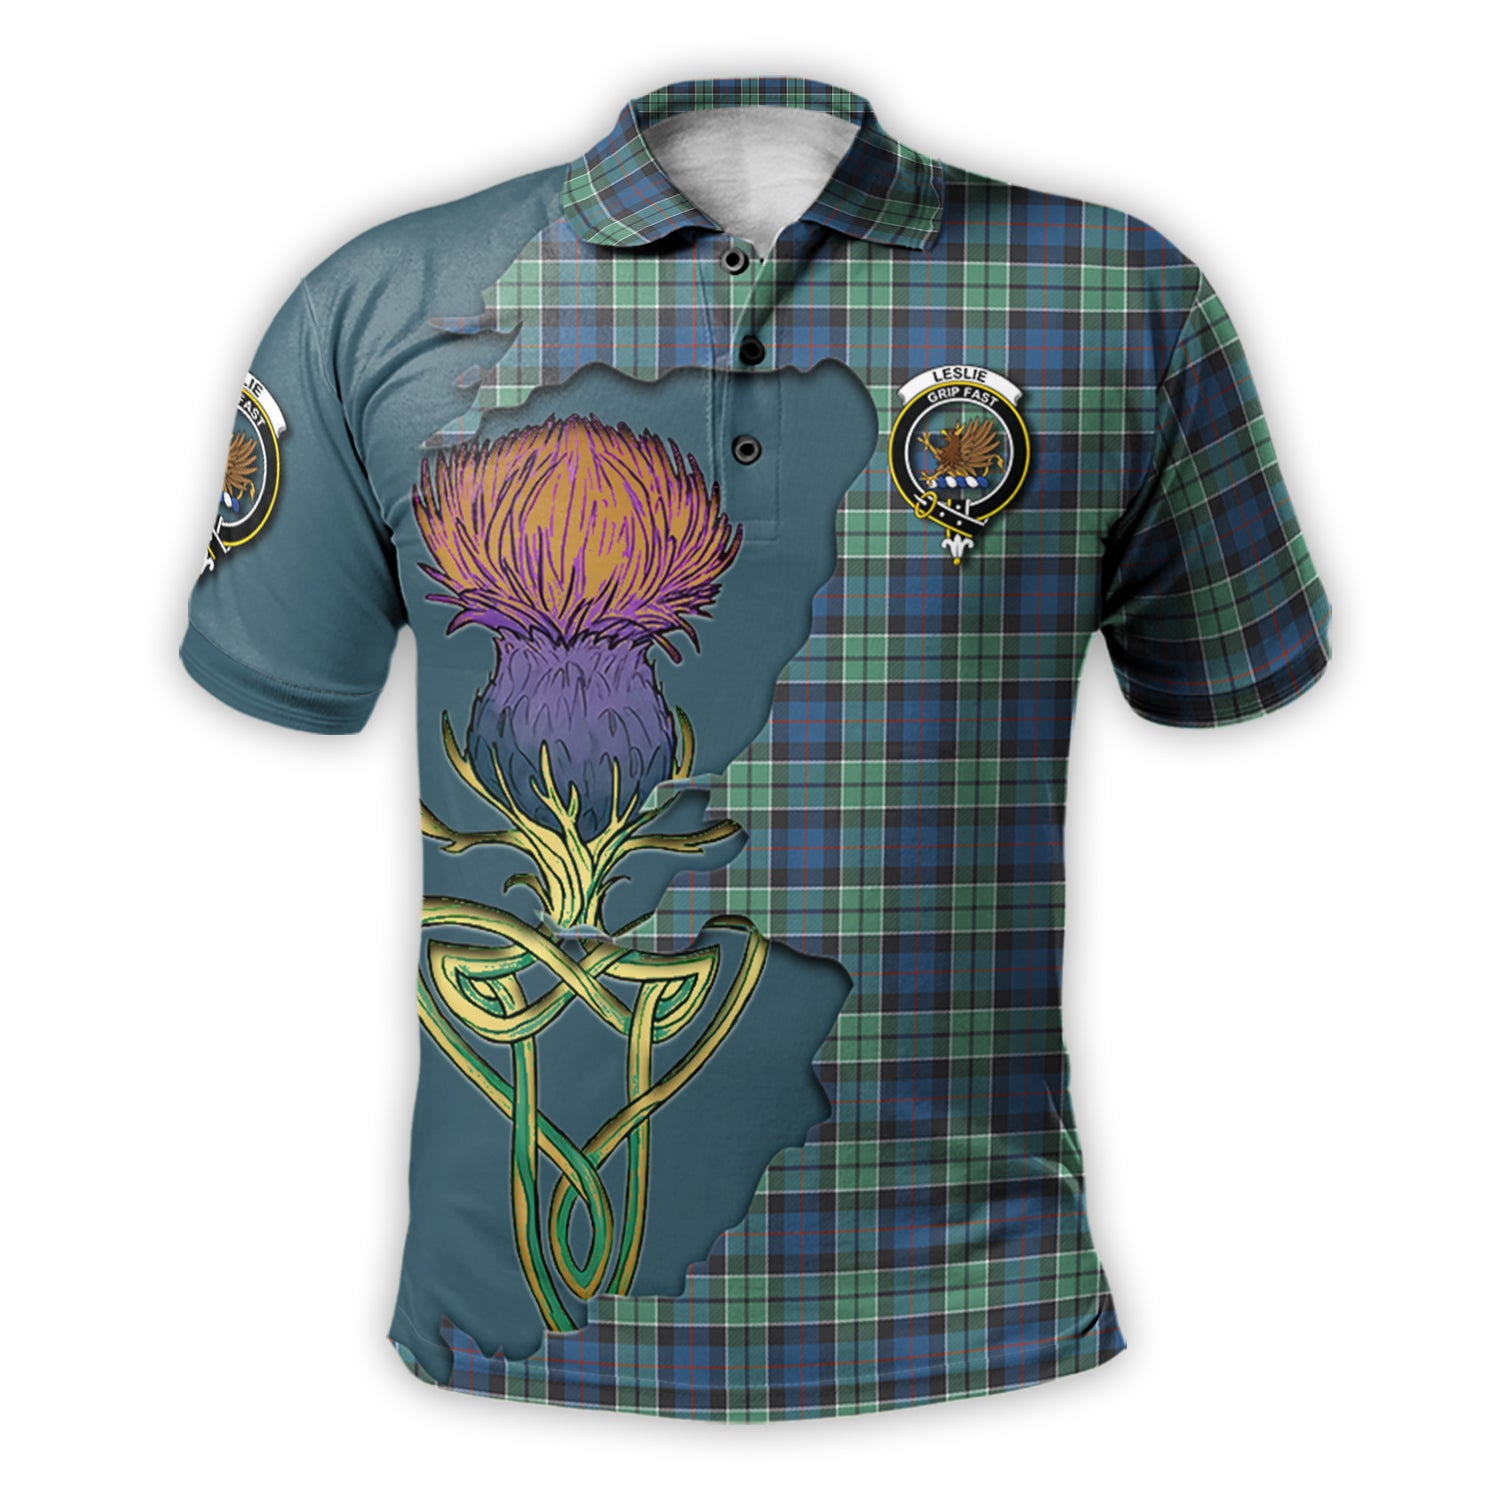 leslie-hunting-ancient-tartan-family-crest-polo-shirt-tartan-plaid-with-thistle-and-scotland-map-polo-shirt